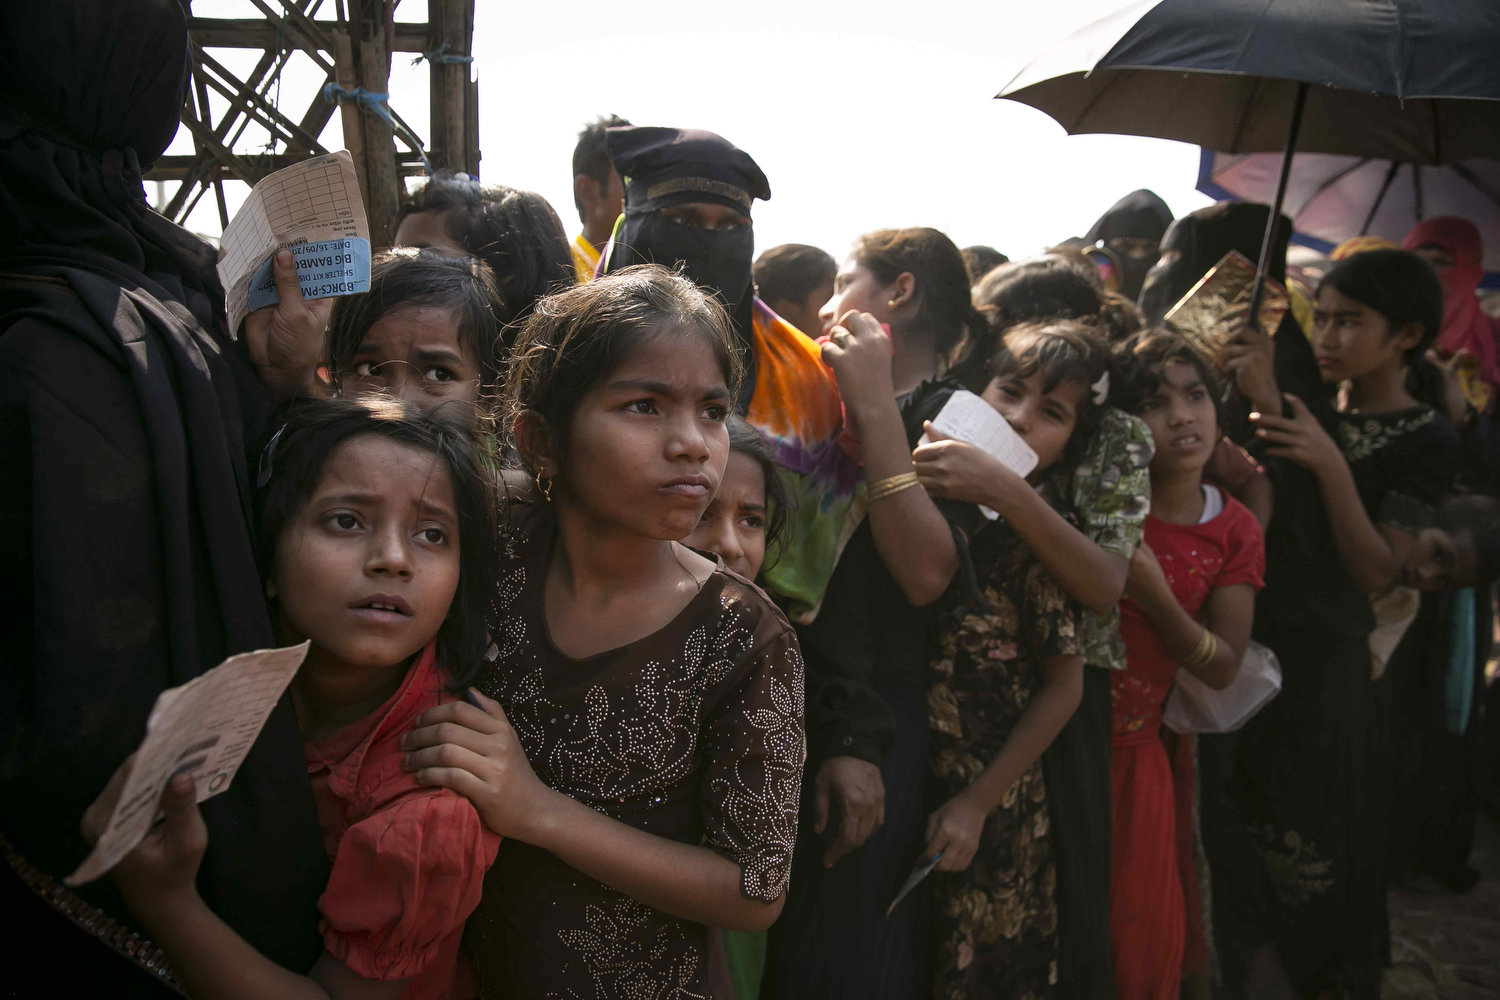 Rohingya refugees queue for a blanket distribution in a refugee camp in Cox's Bazar, Bangladesh. The UN's International Court of Justice in The Hague began on Tuesday hearing a case filed by The Gambia against Myanmar over the Rohingya genocide case. 